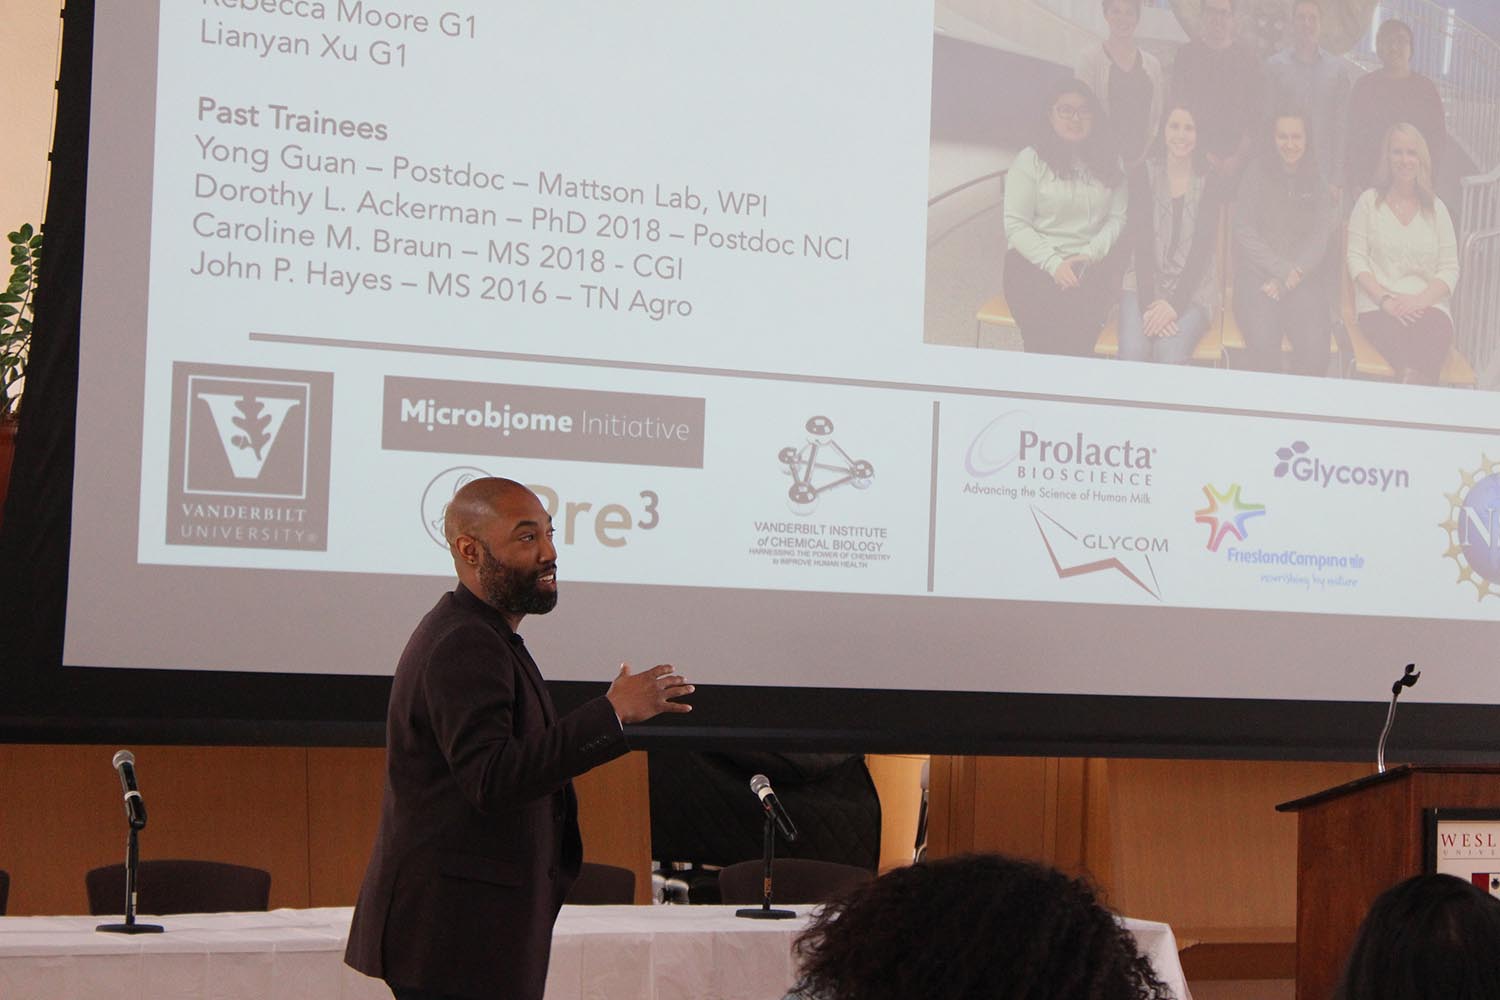 The conference included a keynote speaker, a workshop on Research Basics, and a workshop on Career Development. Discussions focused on what underrepresented and marginalized students need to know about research and the prospects it offers in academia and professional environments.